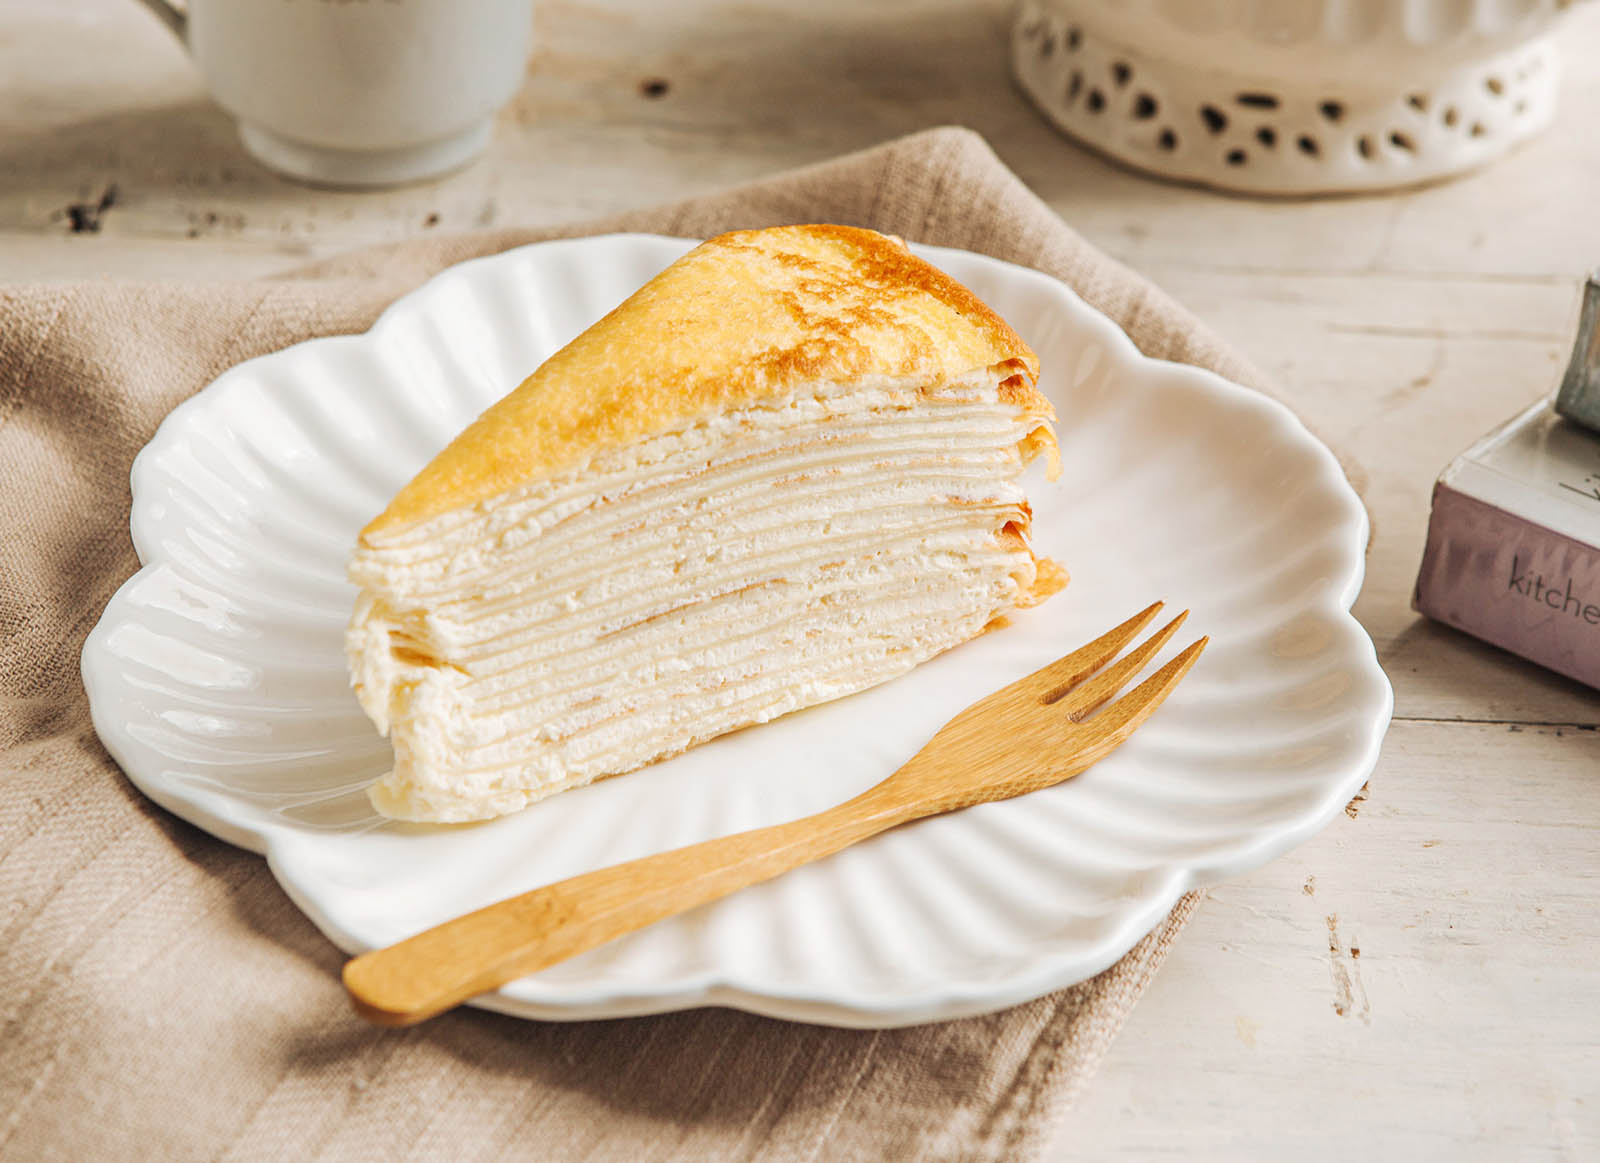 🎂 Don’t Be Shocked When We Guess Your Age and Birth Month from the Desserts You Like Mille Crepe Cake